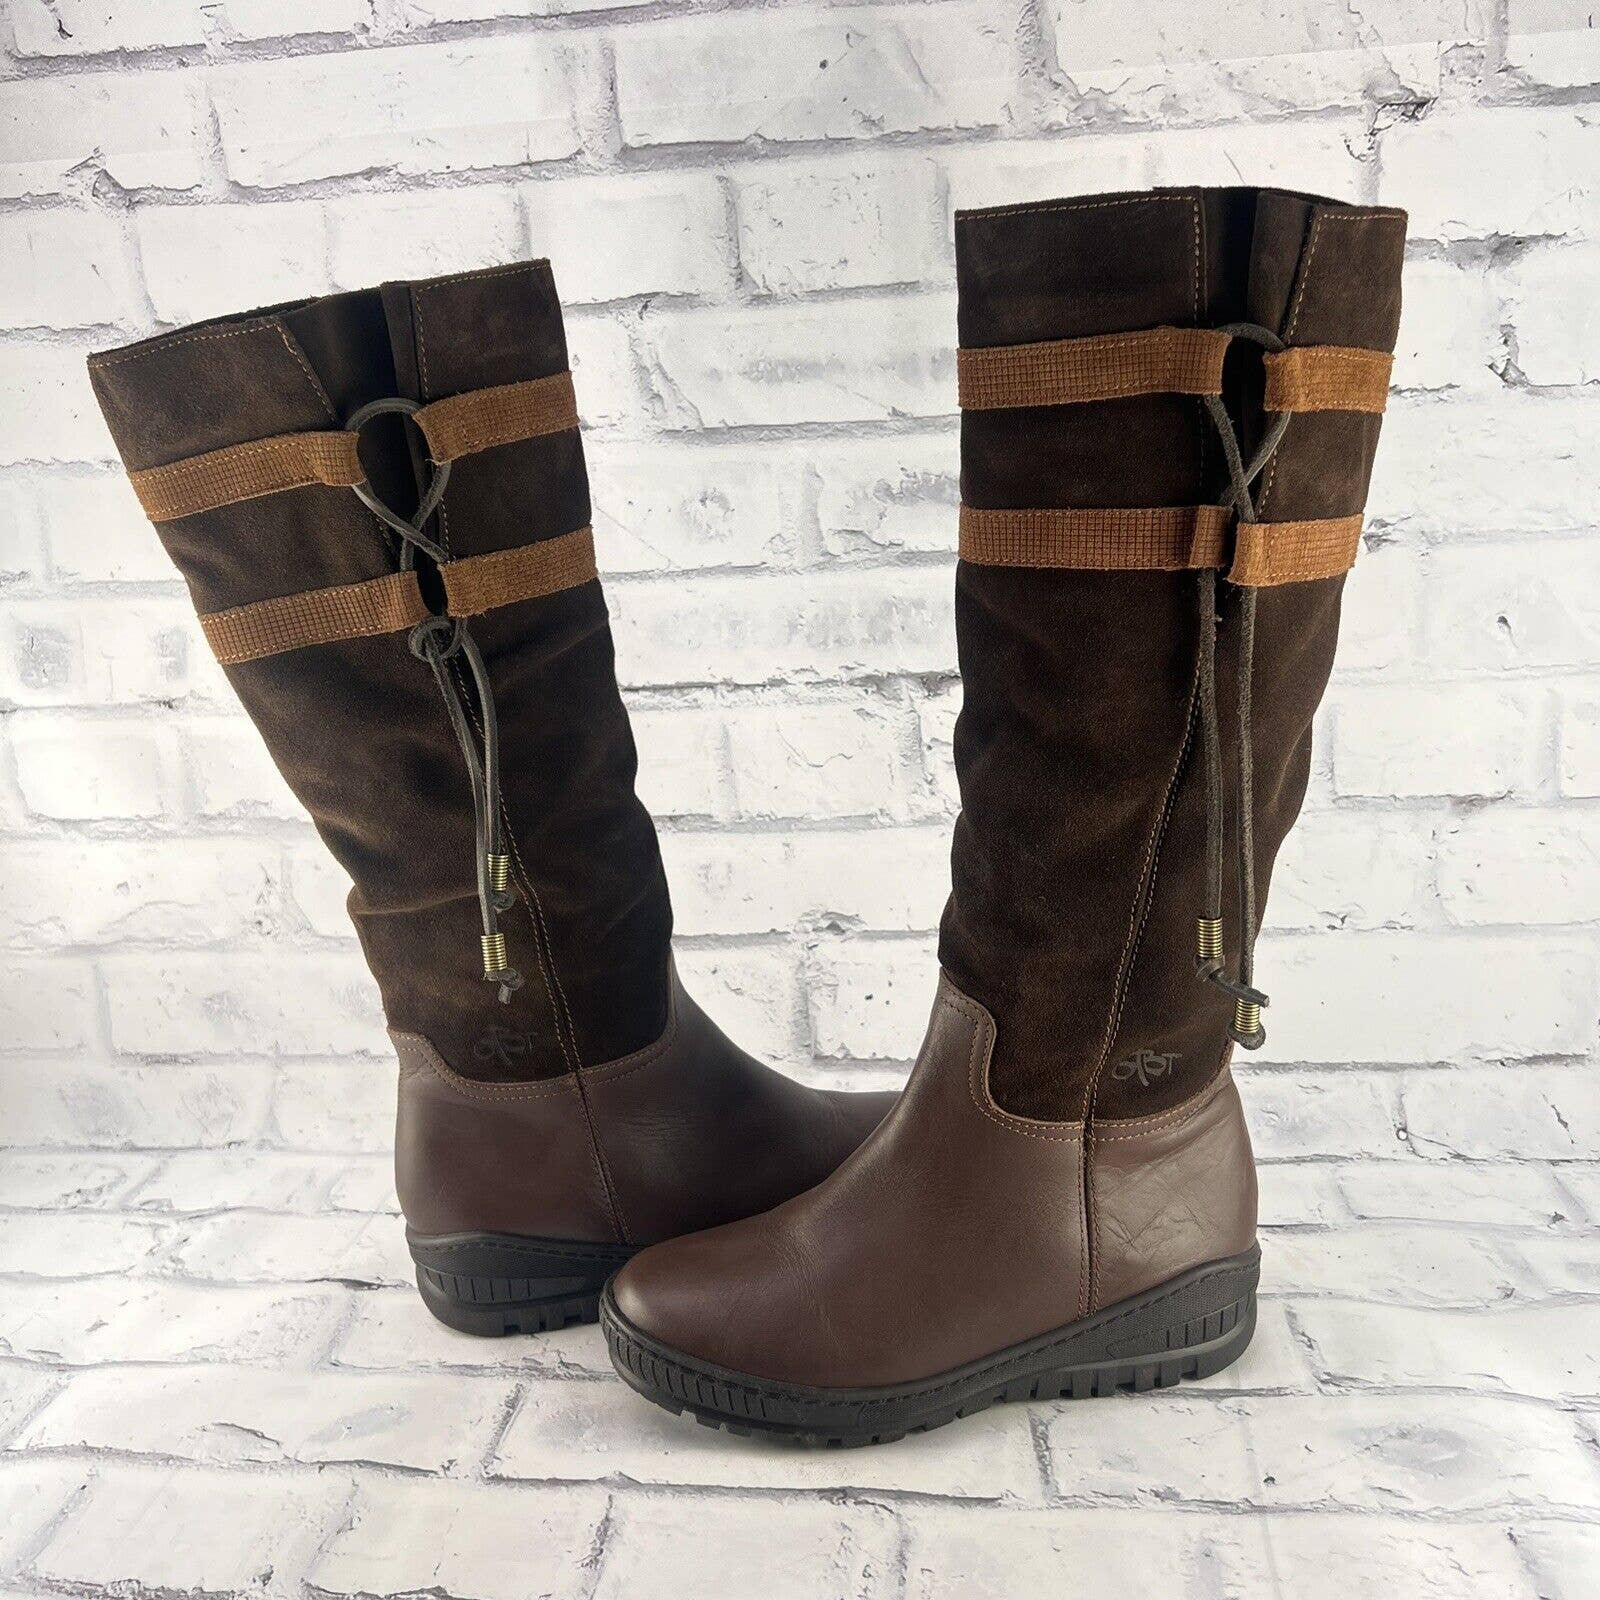 OTBT Move On Cold Winter Boots Women’s 8 Dark Brown Suede Knee High Spiked Soles